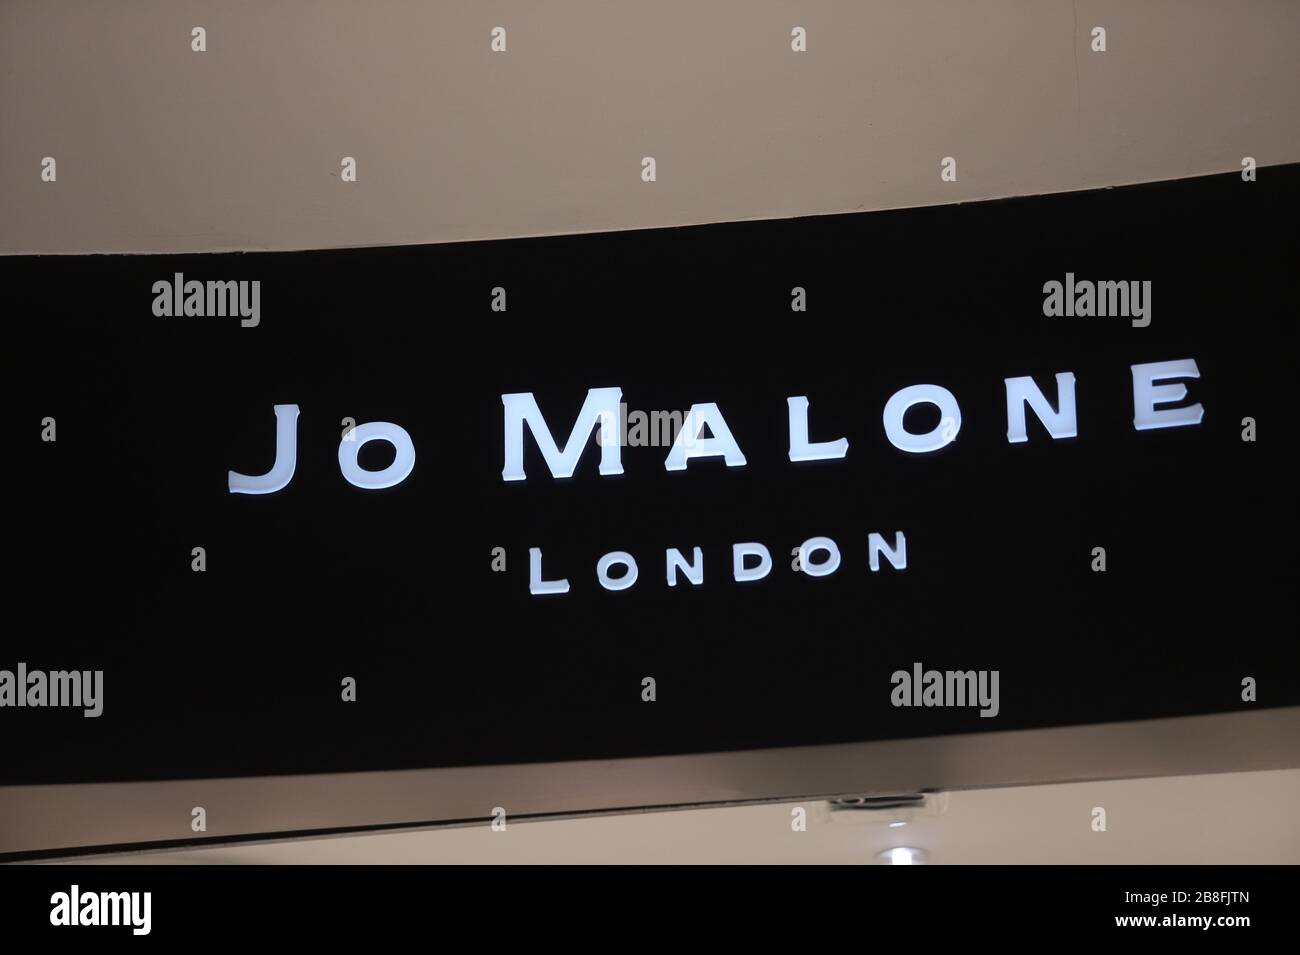 Jo Malone Shop High Resolution Stock Photography and Images - Alamy